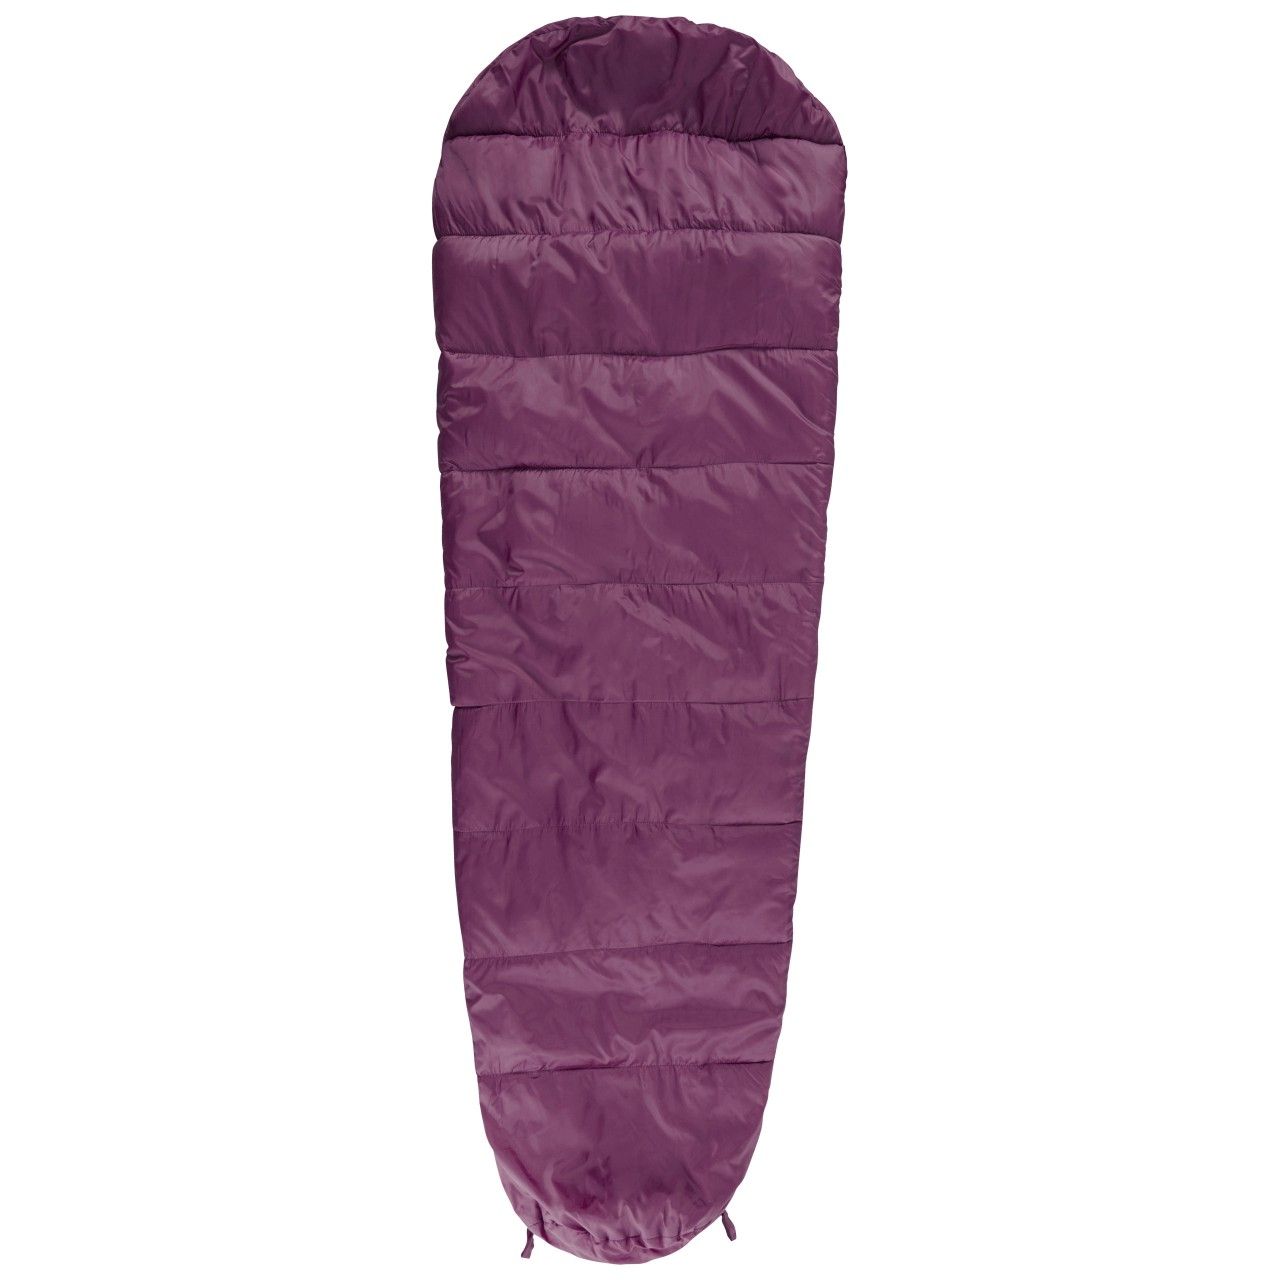 100% polyester. 3 season sleeping bag. Size: 230 x 85 x 55cm. 2 way zipper. Shoulder baffle. Upper limit: +22C, Comfort: +13C, Lower limit: +0C, Extreme: -3C. Shell: Water repellent polyester, Lining: lightweight polycotton, hollowfibre filling.